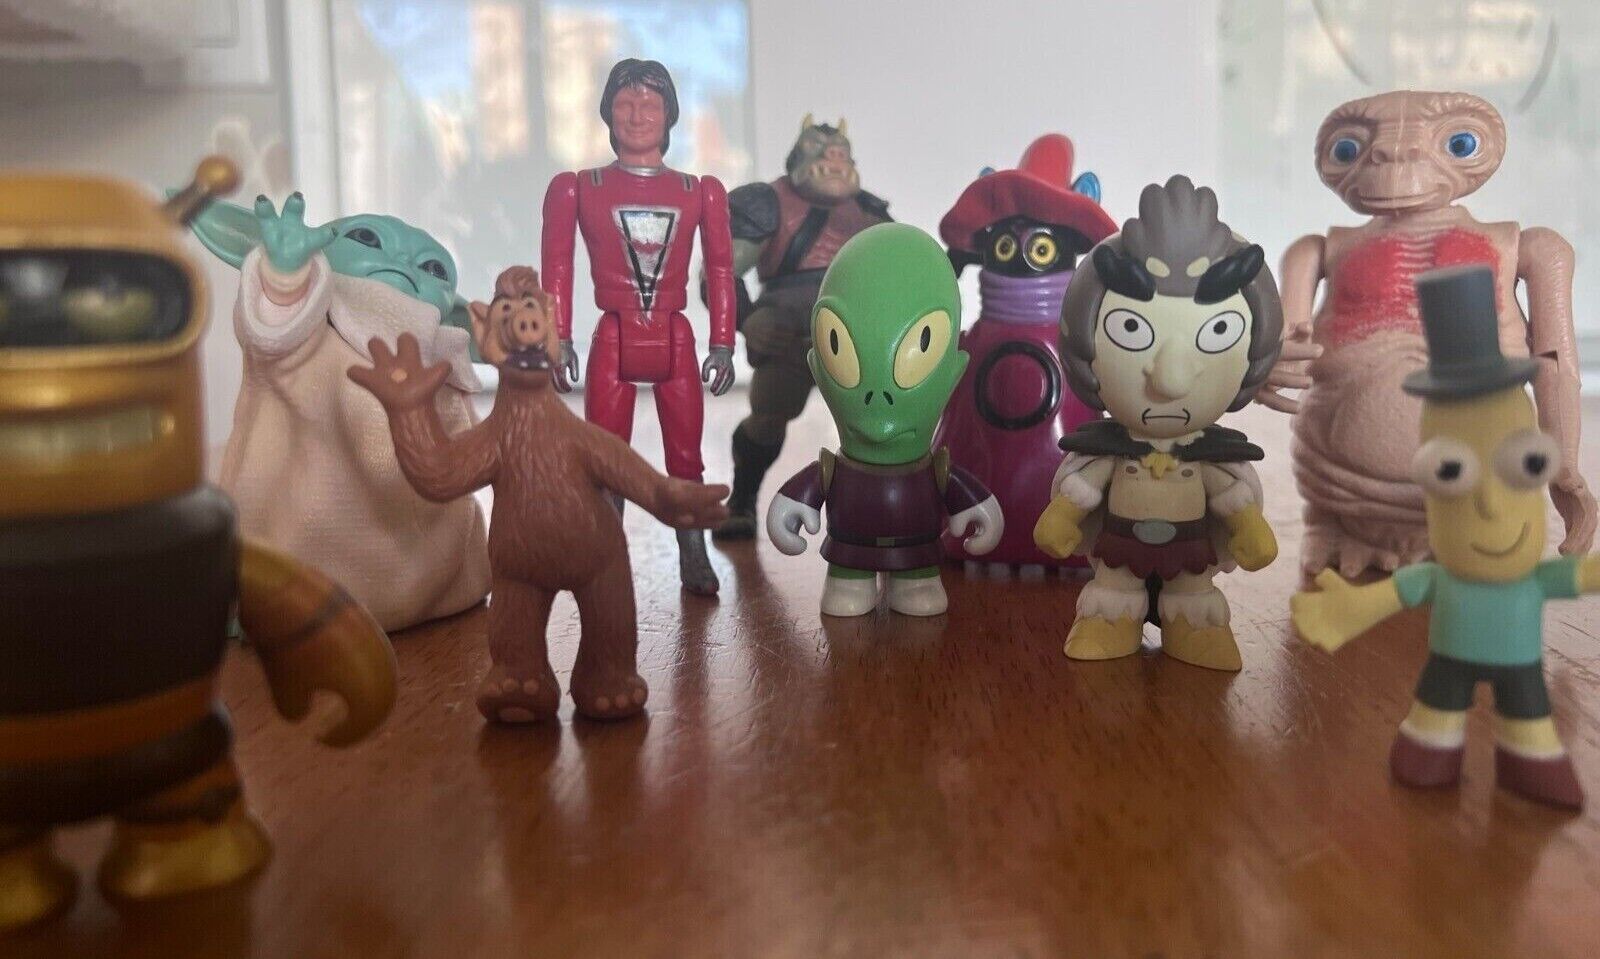 Misc Extraterrestrial Figurines - Lot of 10 - Fan Favorites (Mork, E.T., more)